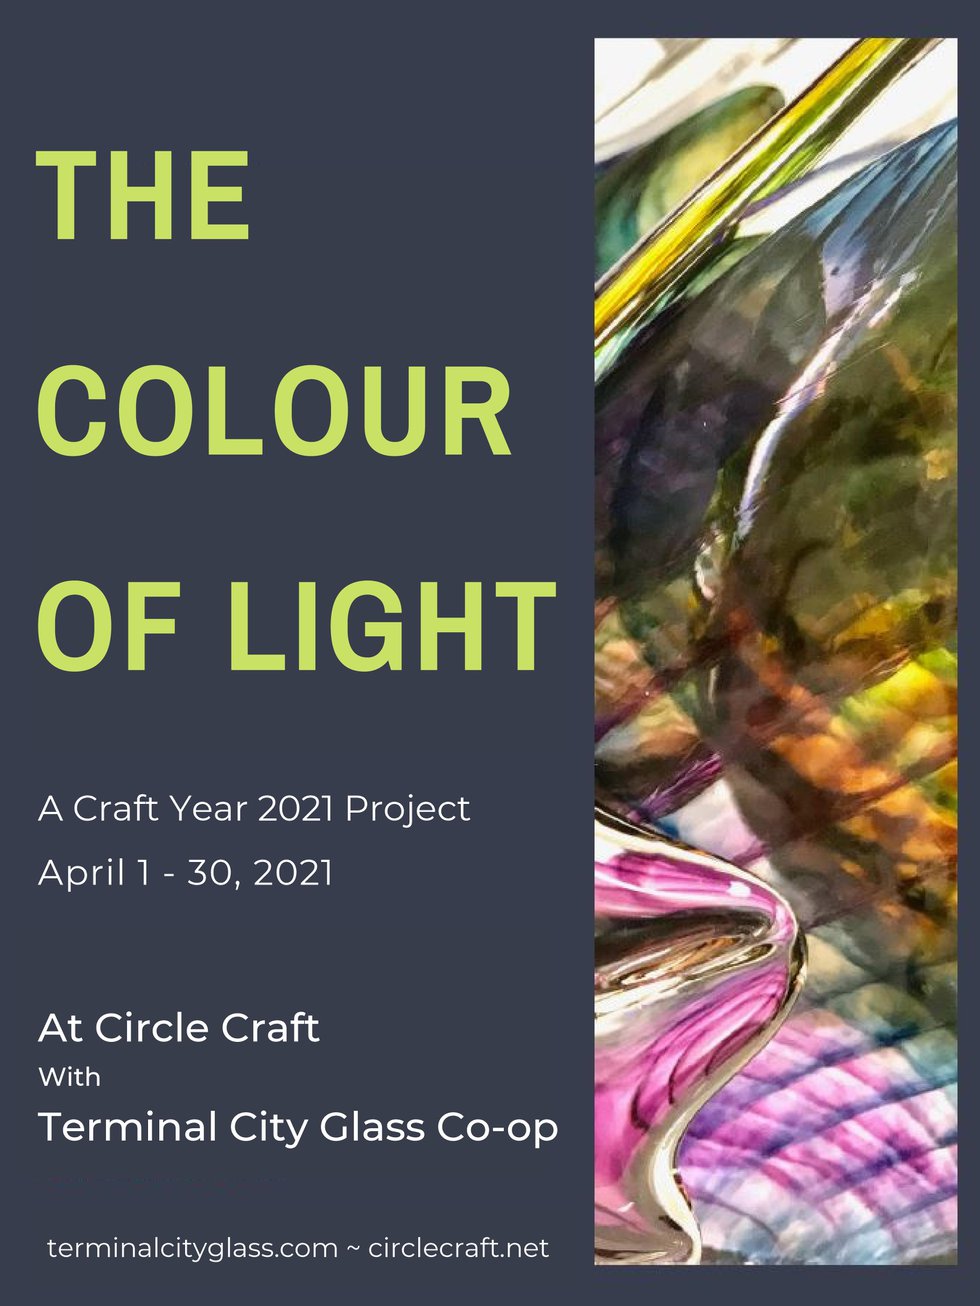 Circle Craft Co-operative and Terminal City Glass Co-op, "The Colour of Light," 2021